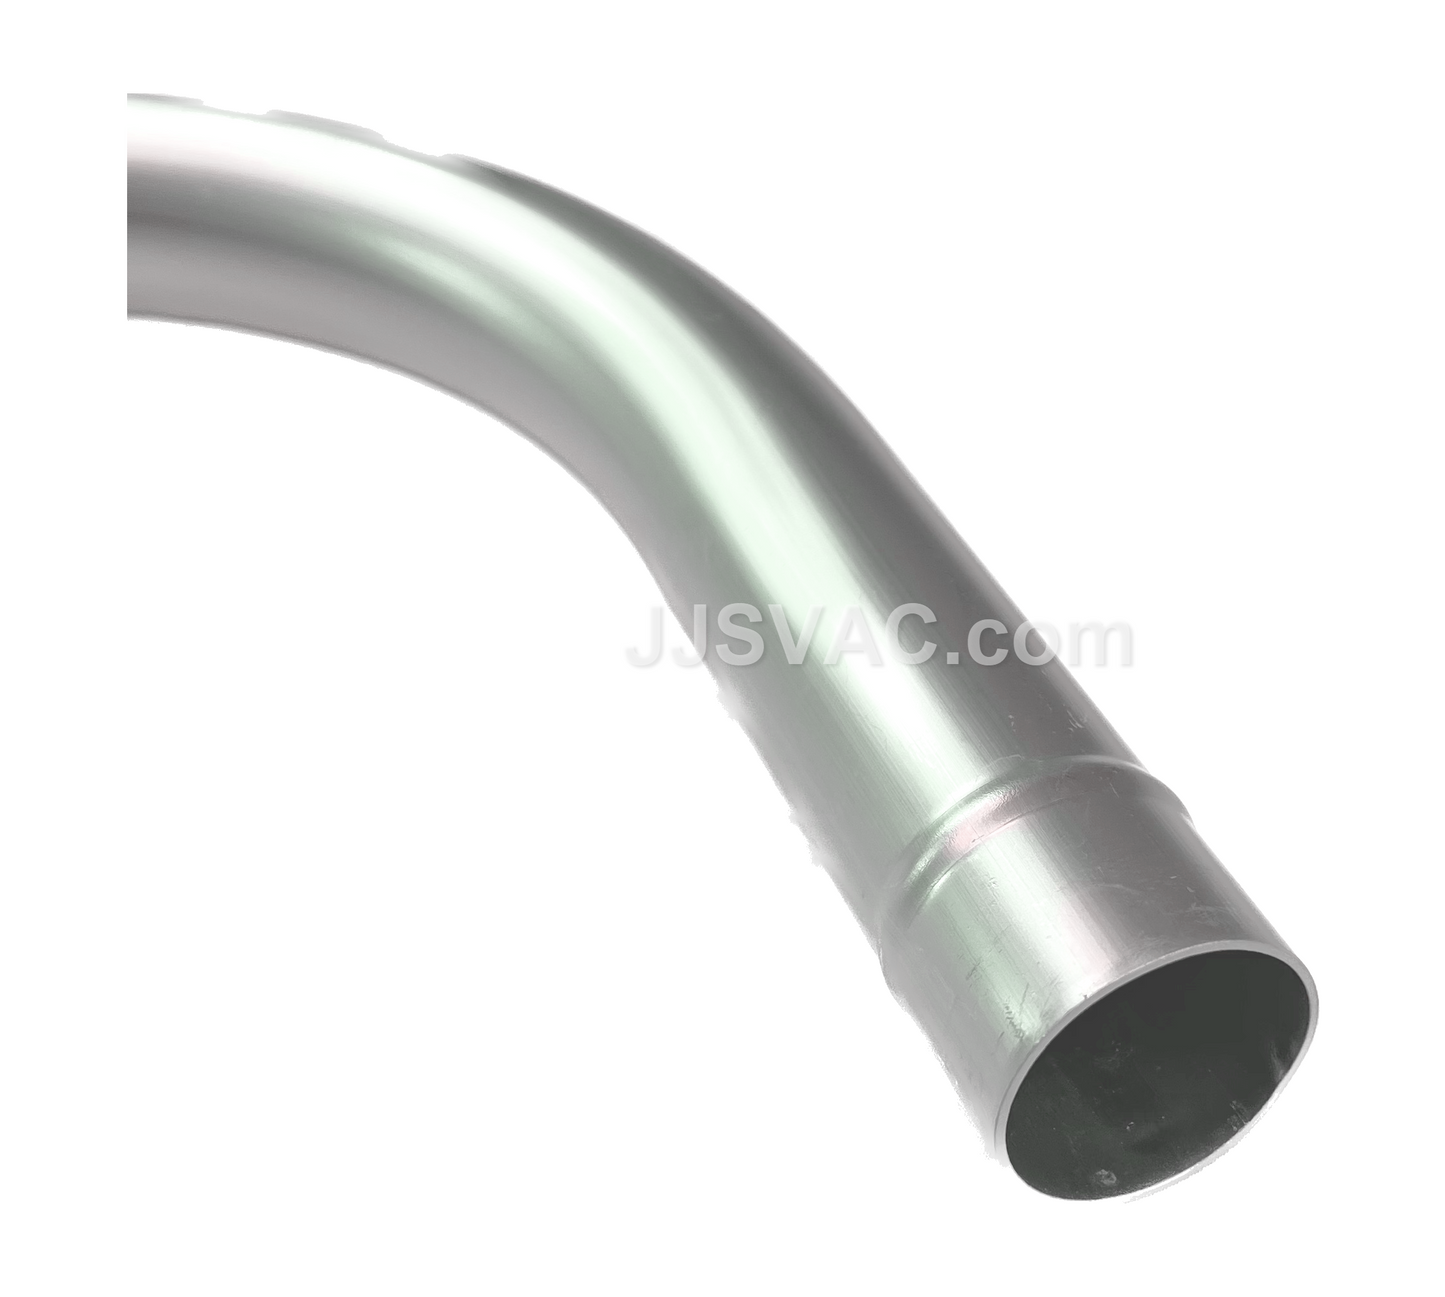 1-1/2" One Piece Vacuum Cleaning Wand - 49" Aluminum Tube - Metal Coupling - Friction Fit - Flexaust / TUEC 49A5